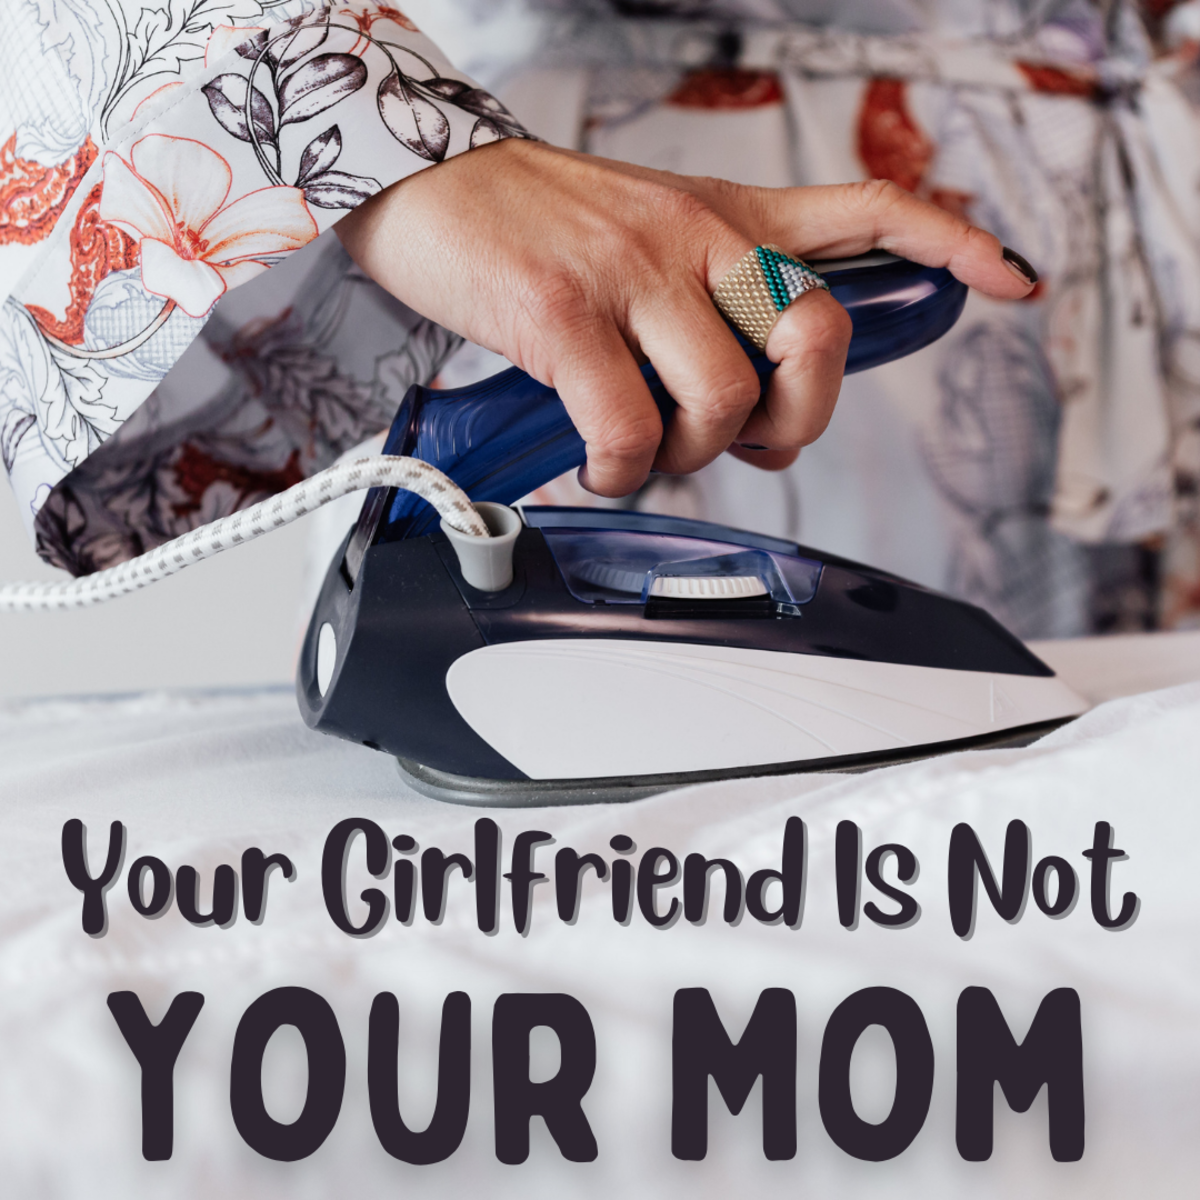 Does your boyfriend always make you cook? Do you always find yourself cleaning up after him? You're not his mom, so stop acting like it!